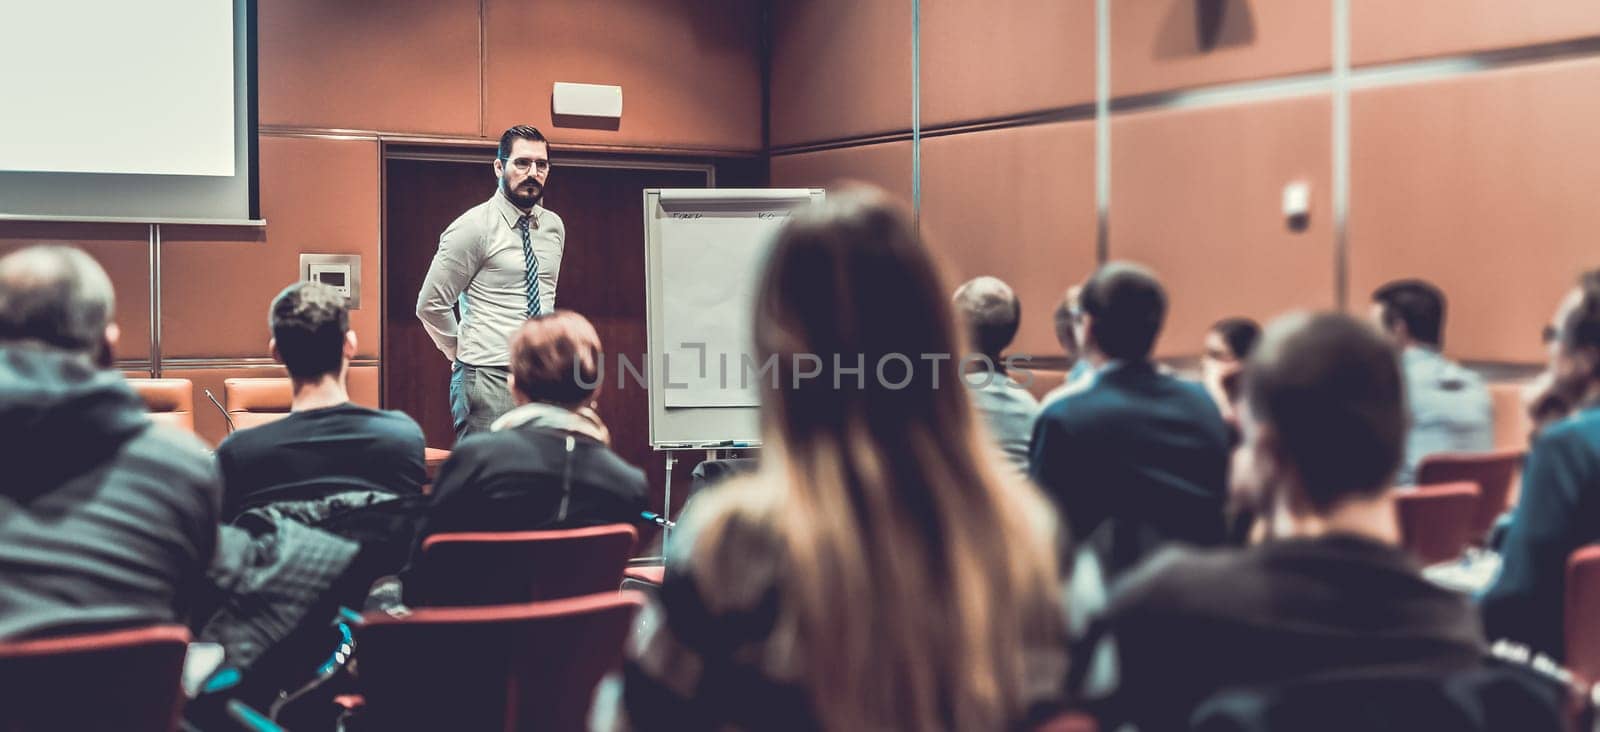 Skiled Public Speaker Giving a Talk at Business Meeting. by kasto